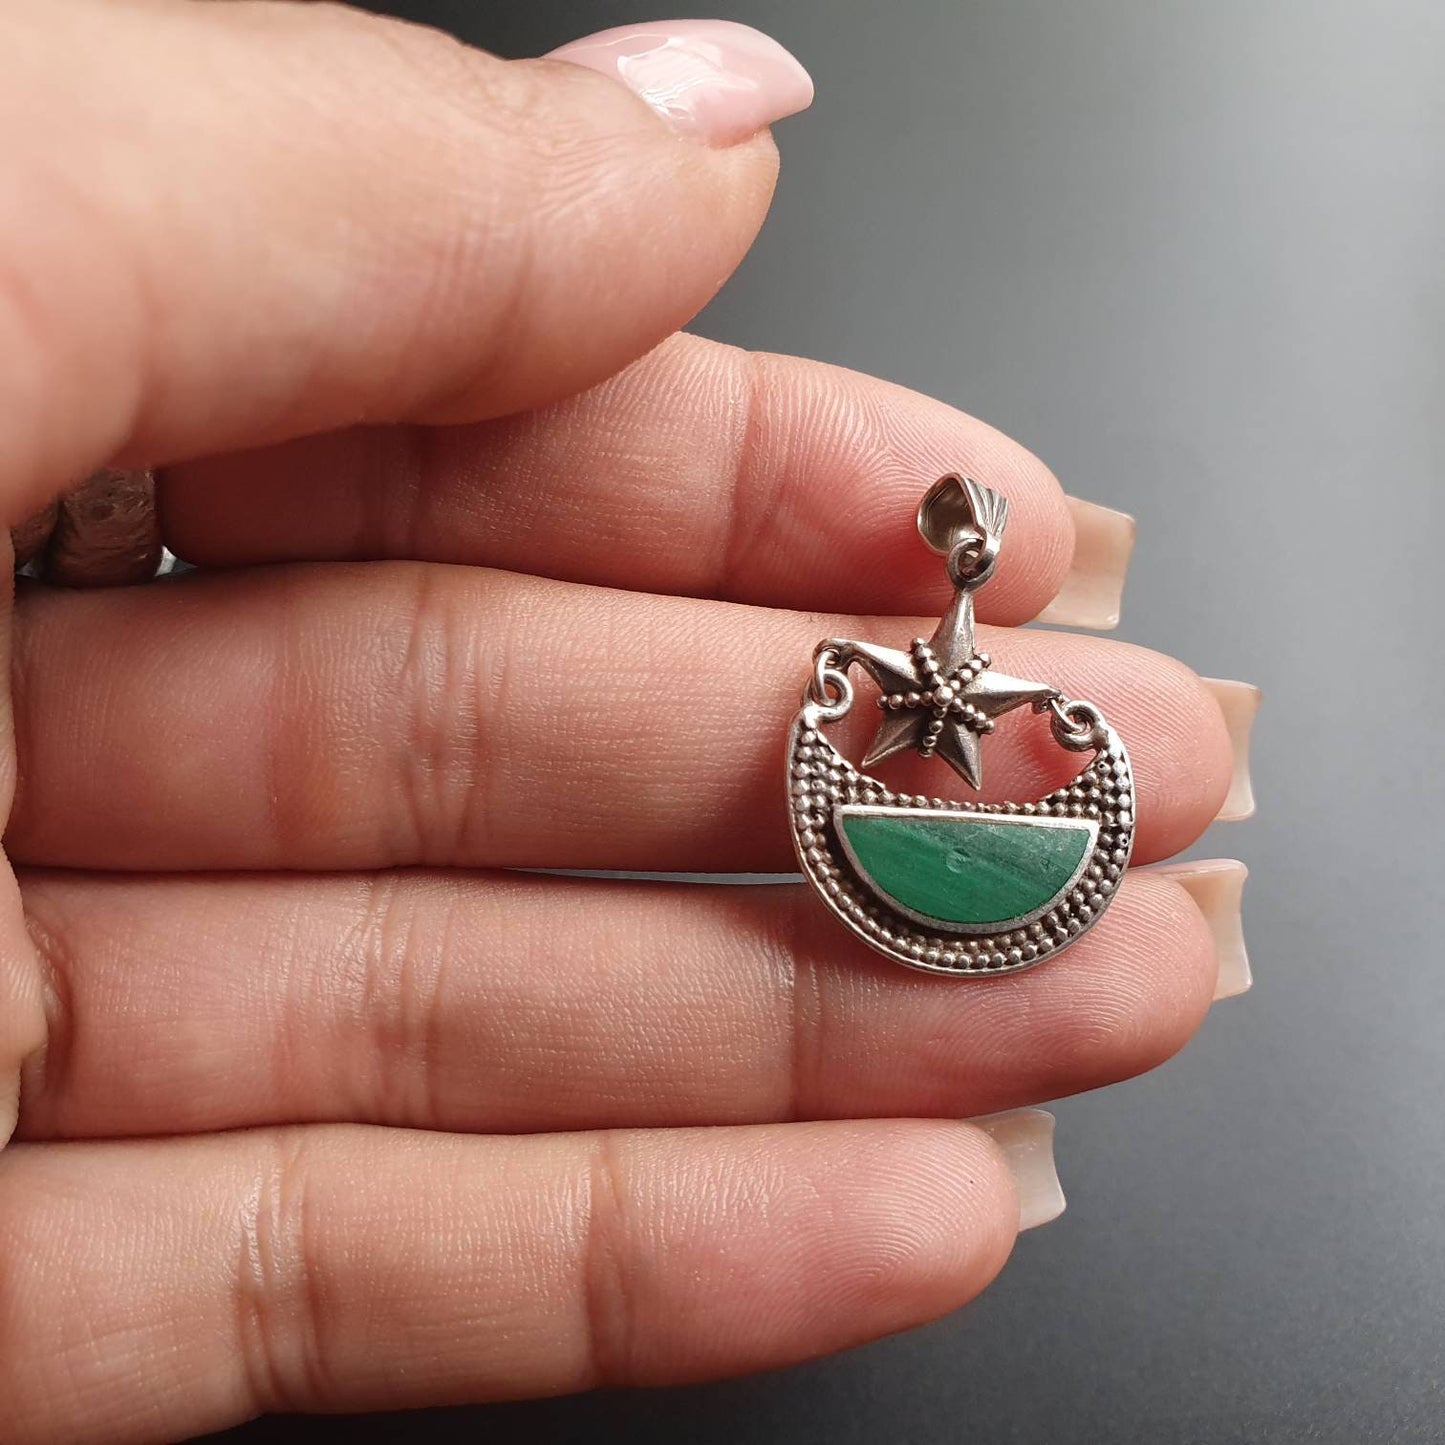 Moon star pendant, sterling silver pendant, astronomy,moon,star, malachite, pendant, necklace, gifts, statement,